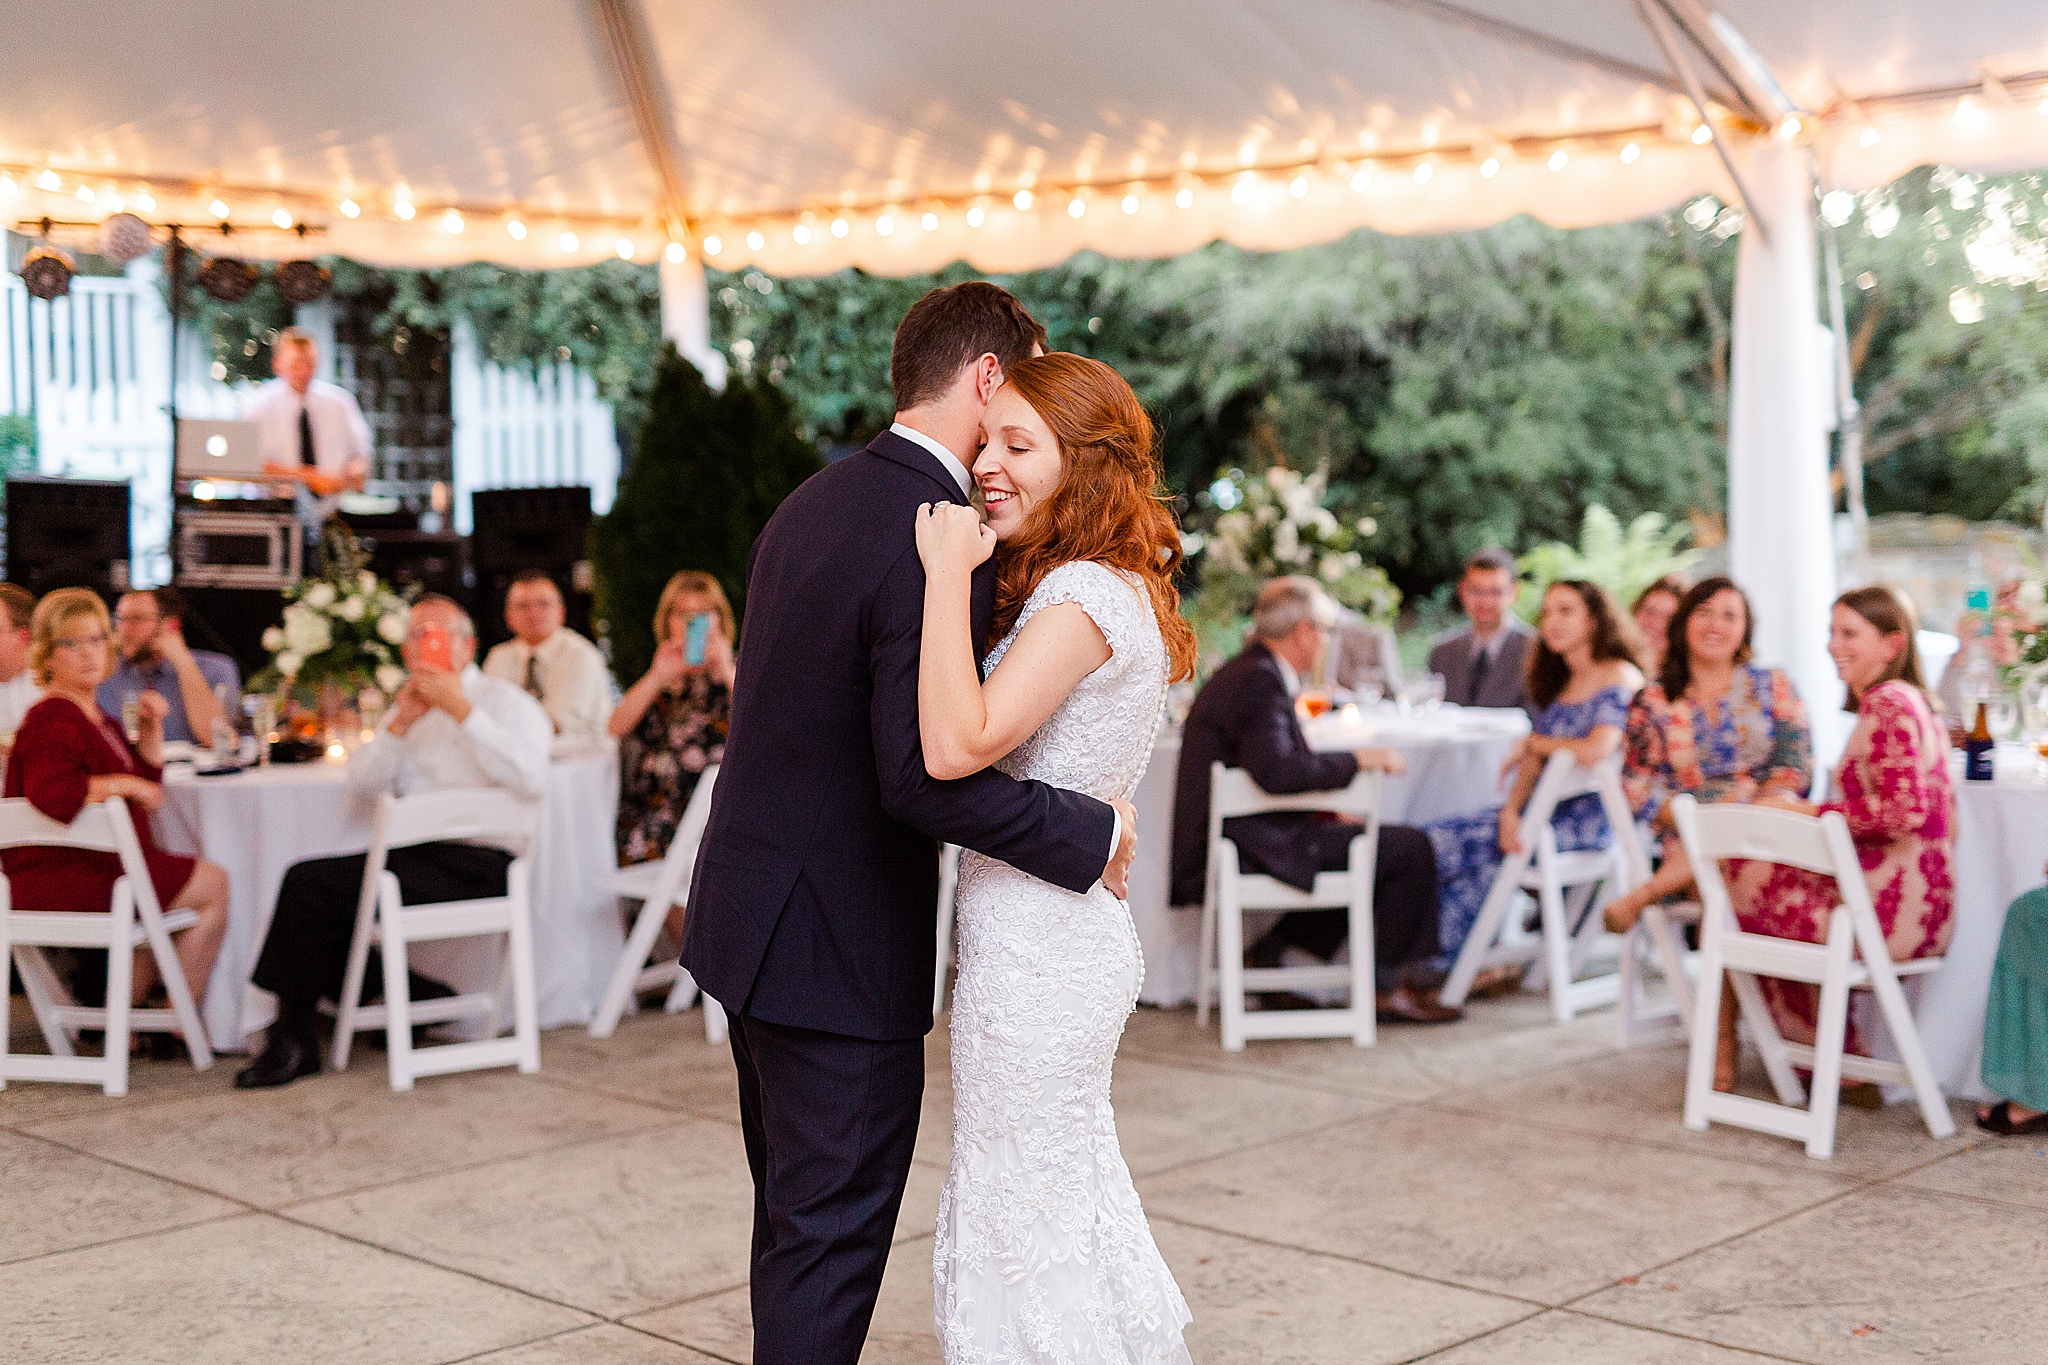 first dance at Lake O' The Woods Plantation wedding reception